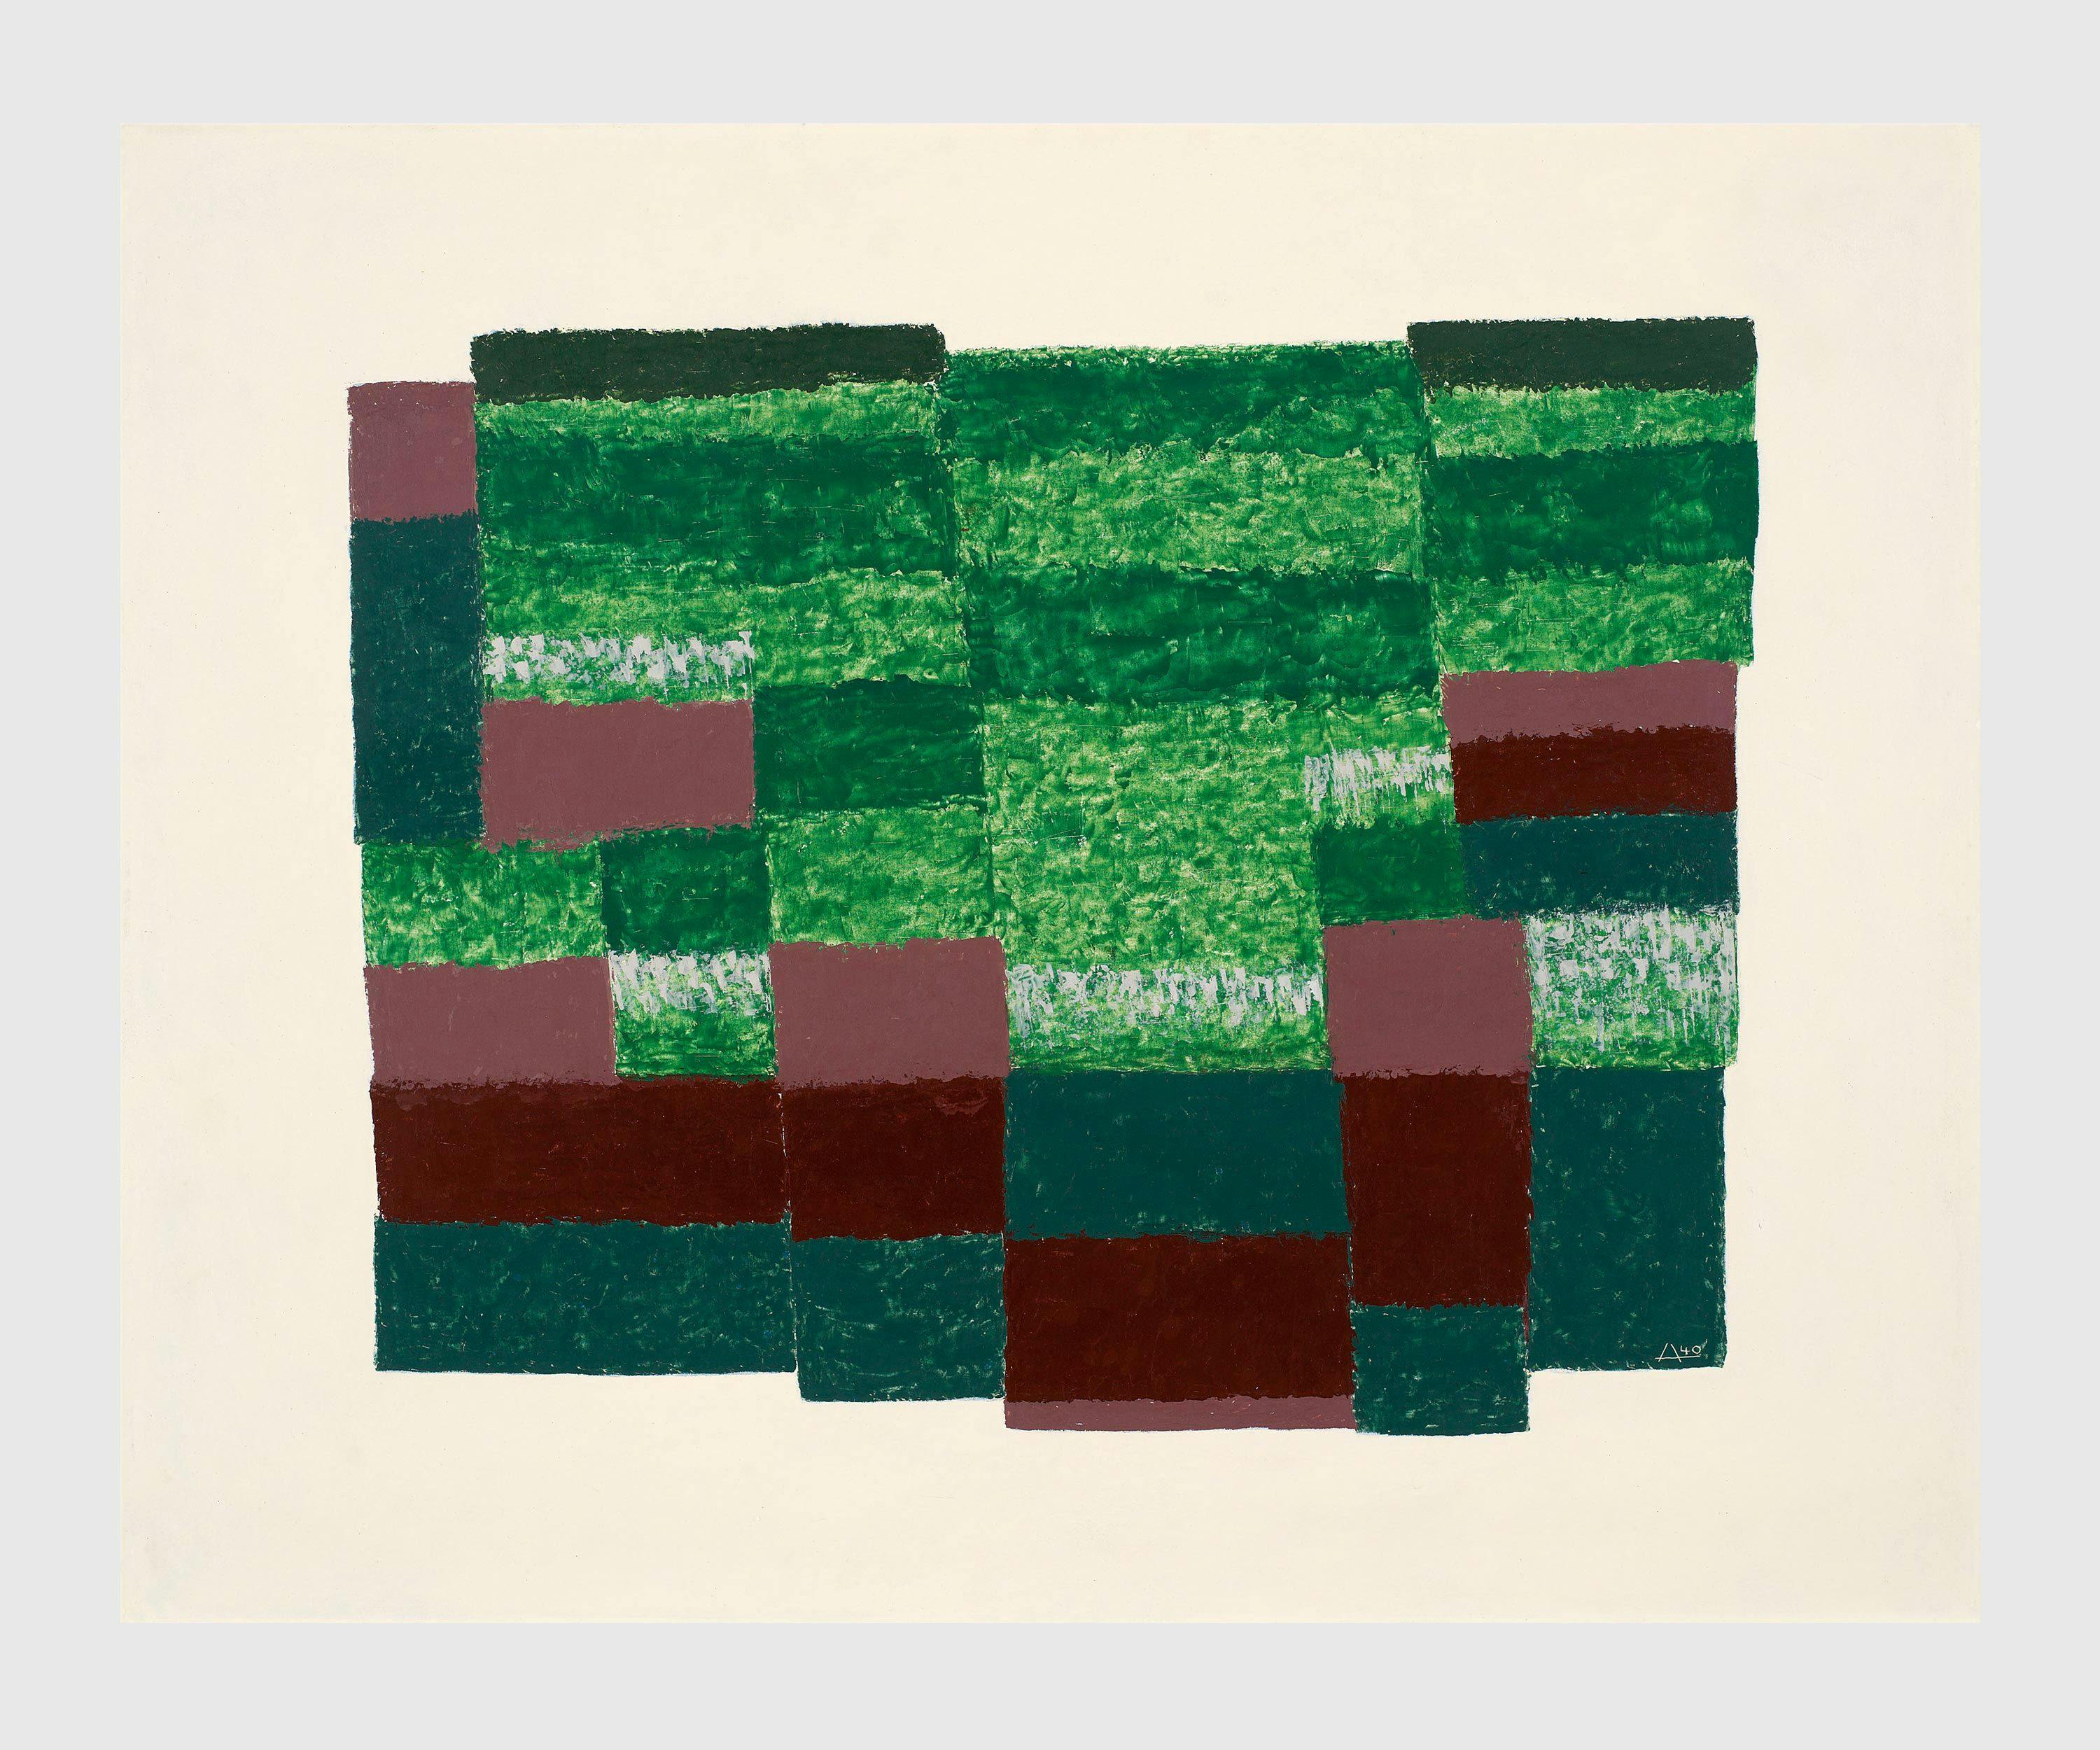 A painting by Josef Albers, titled Tierra Verde, dated 1940.